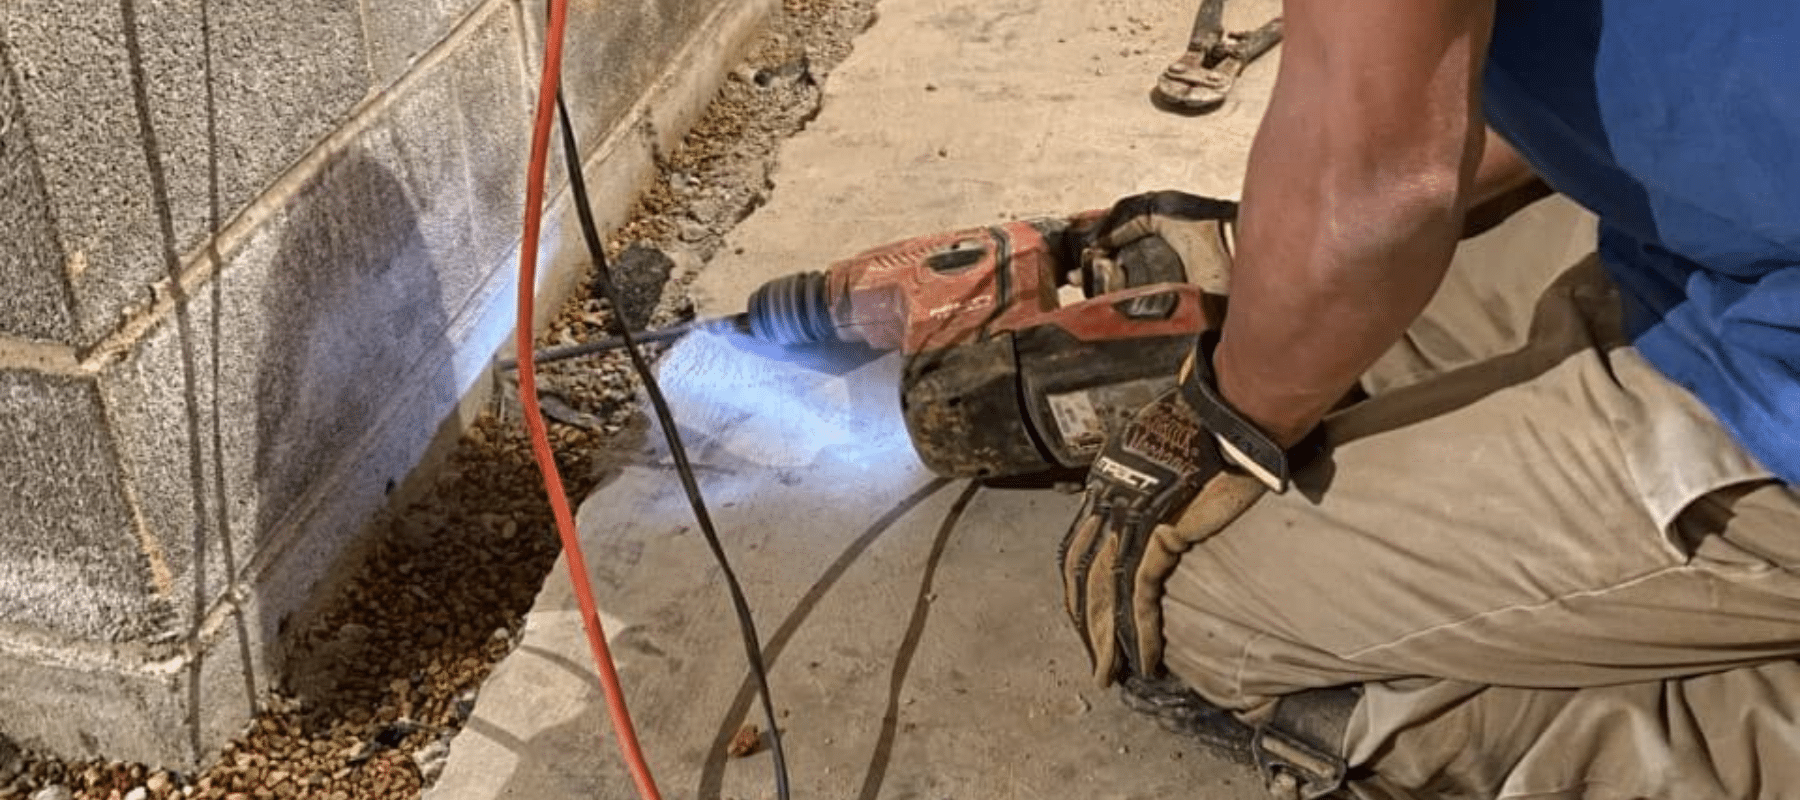 A man drilling a hole in foundation